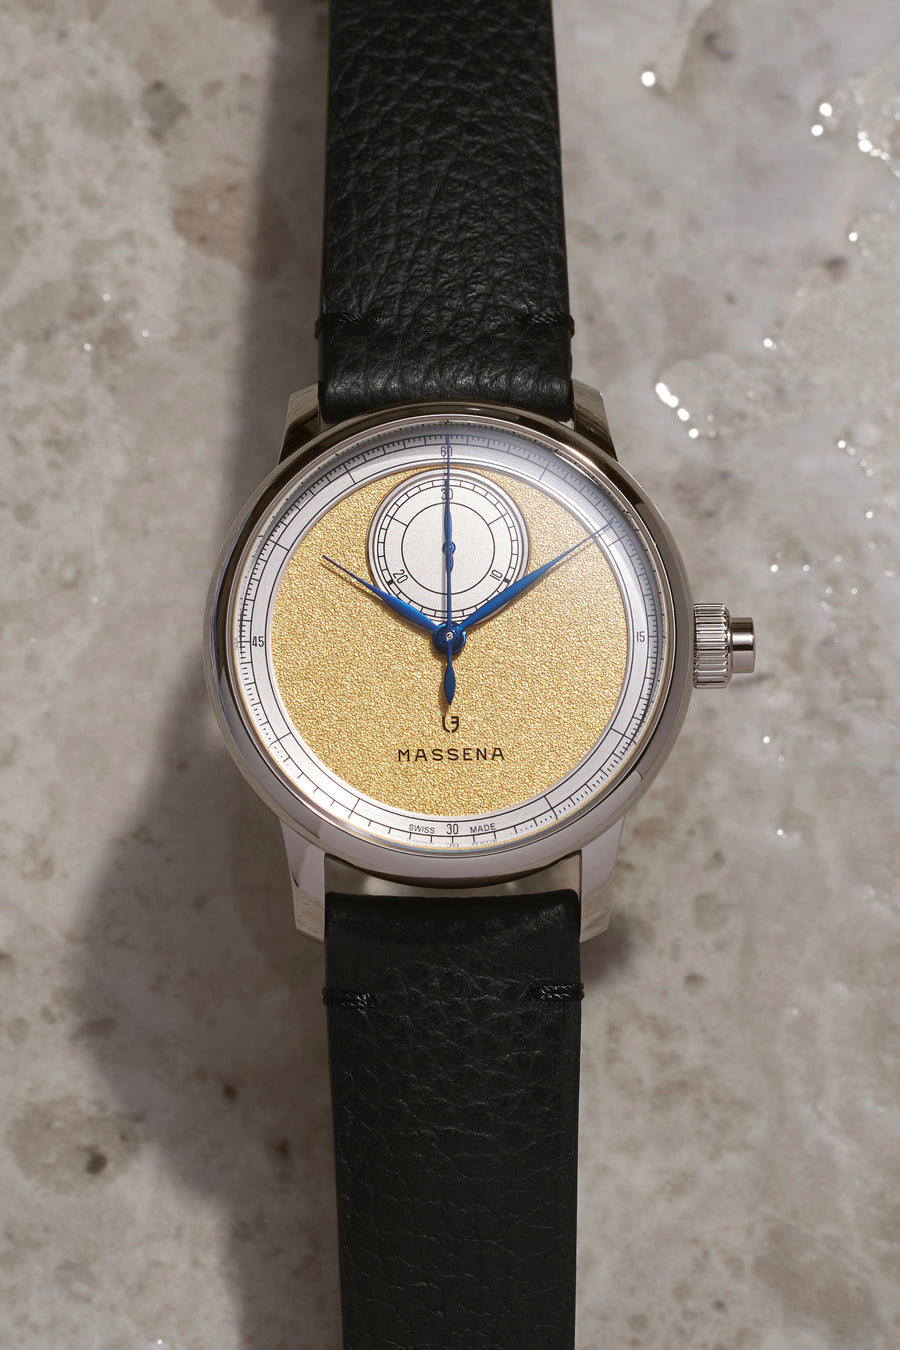 Louis Erard LE RÉGULATEUR LOUIS ERARD X MASSENA LAB, GOLD for $2,999 for  sale from a Trusted Seller on Chrono24